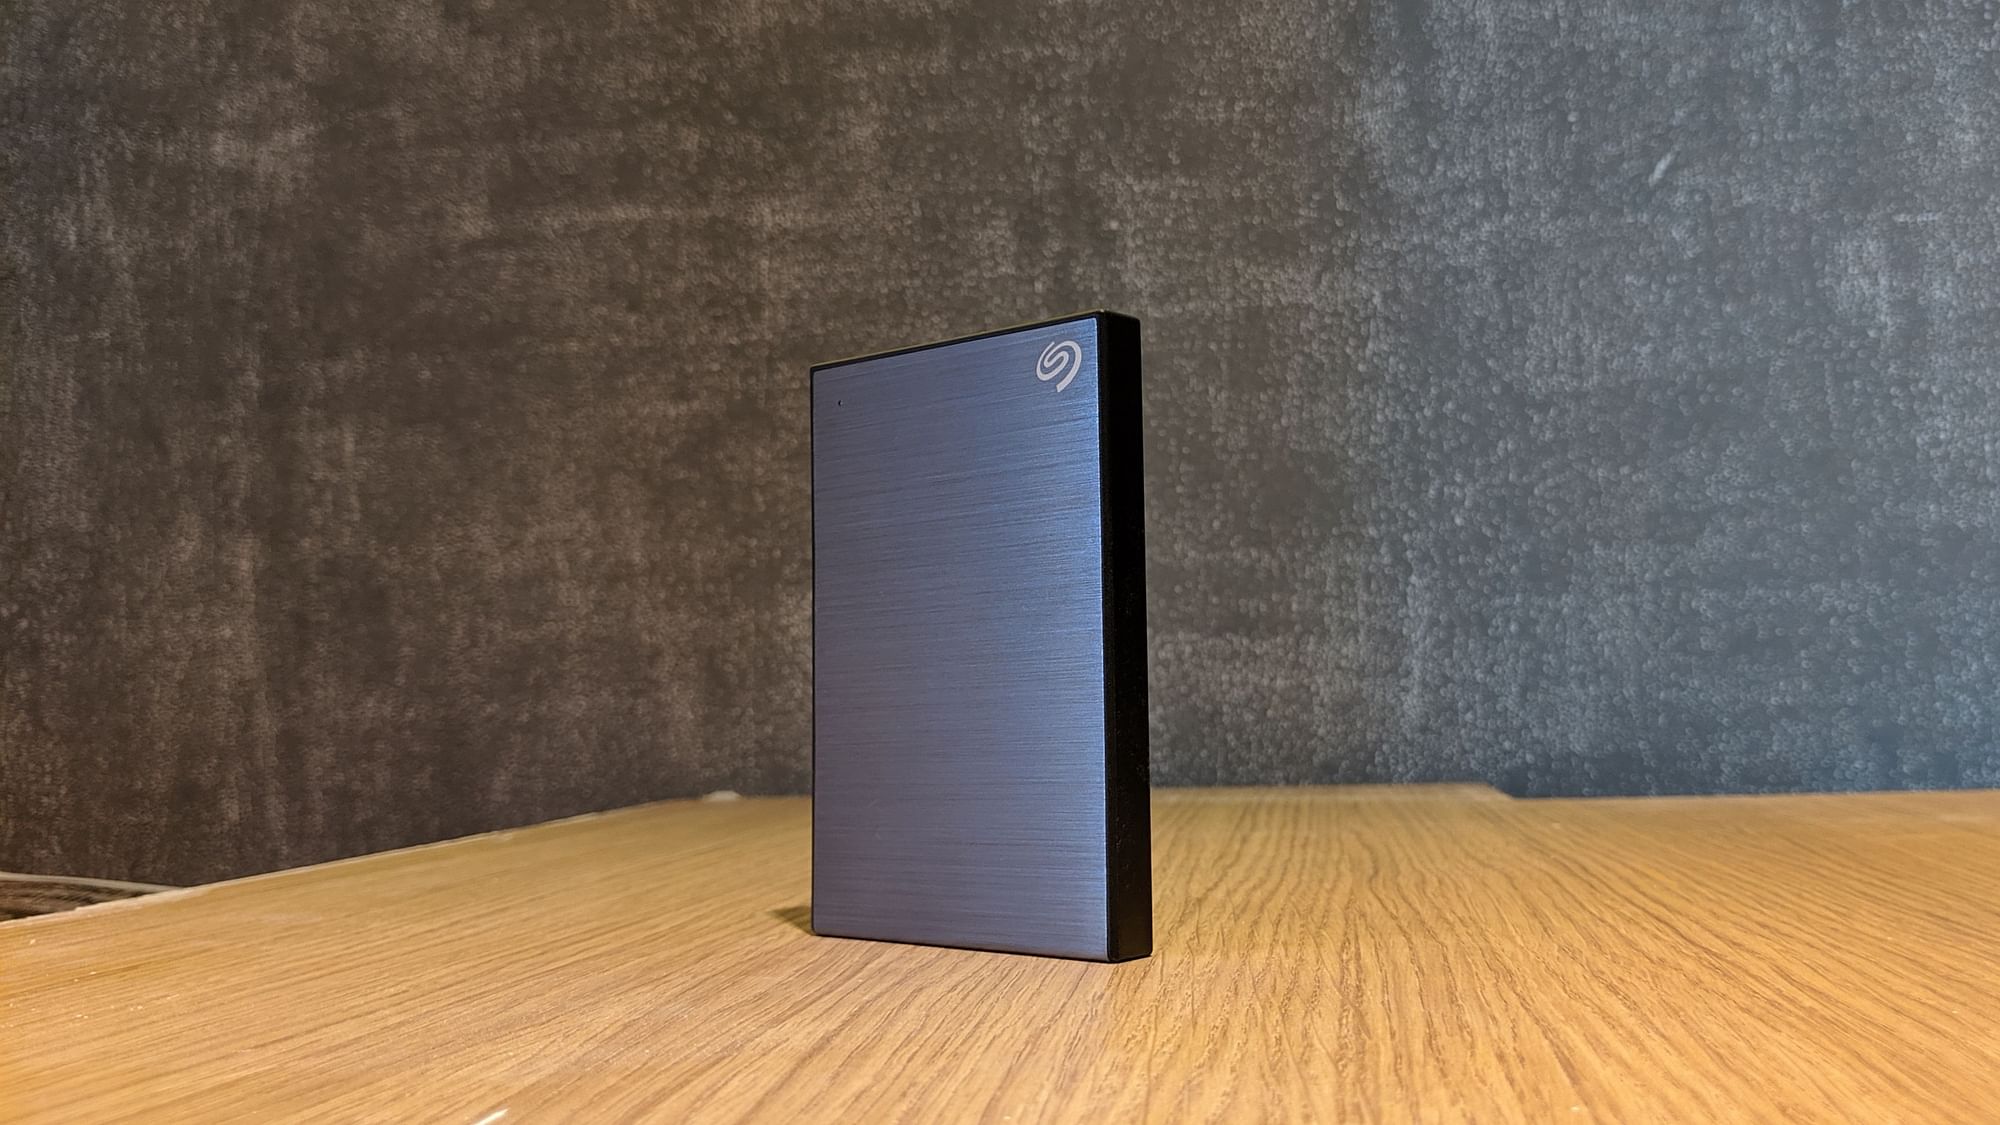 is the seagate backup plus slim 2tb a solid state drive